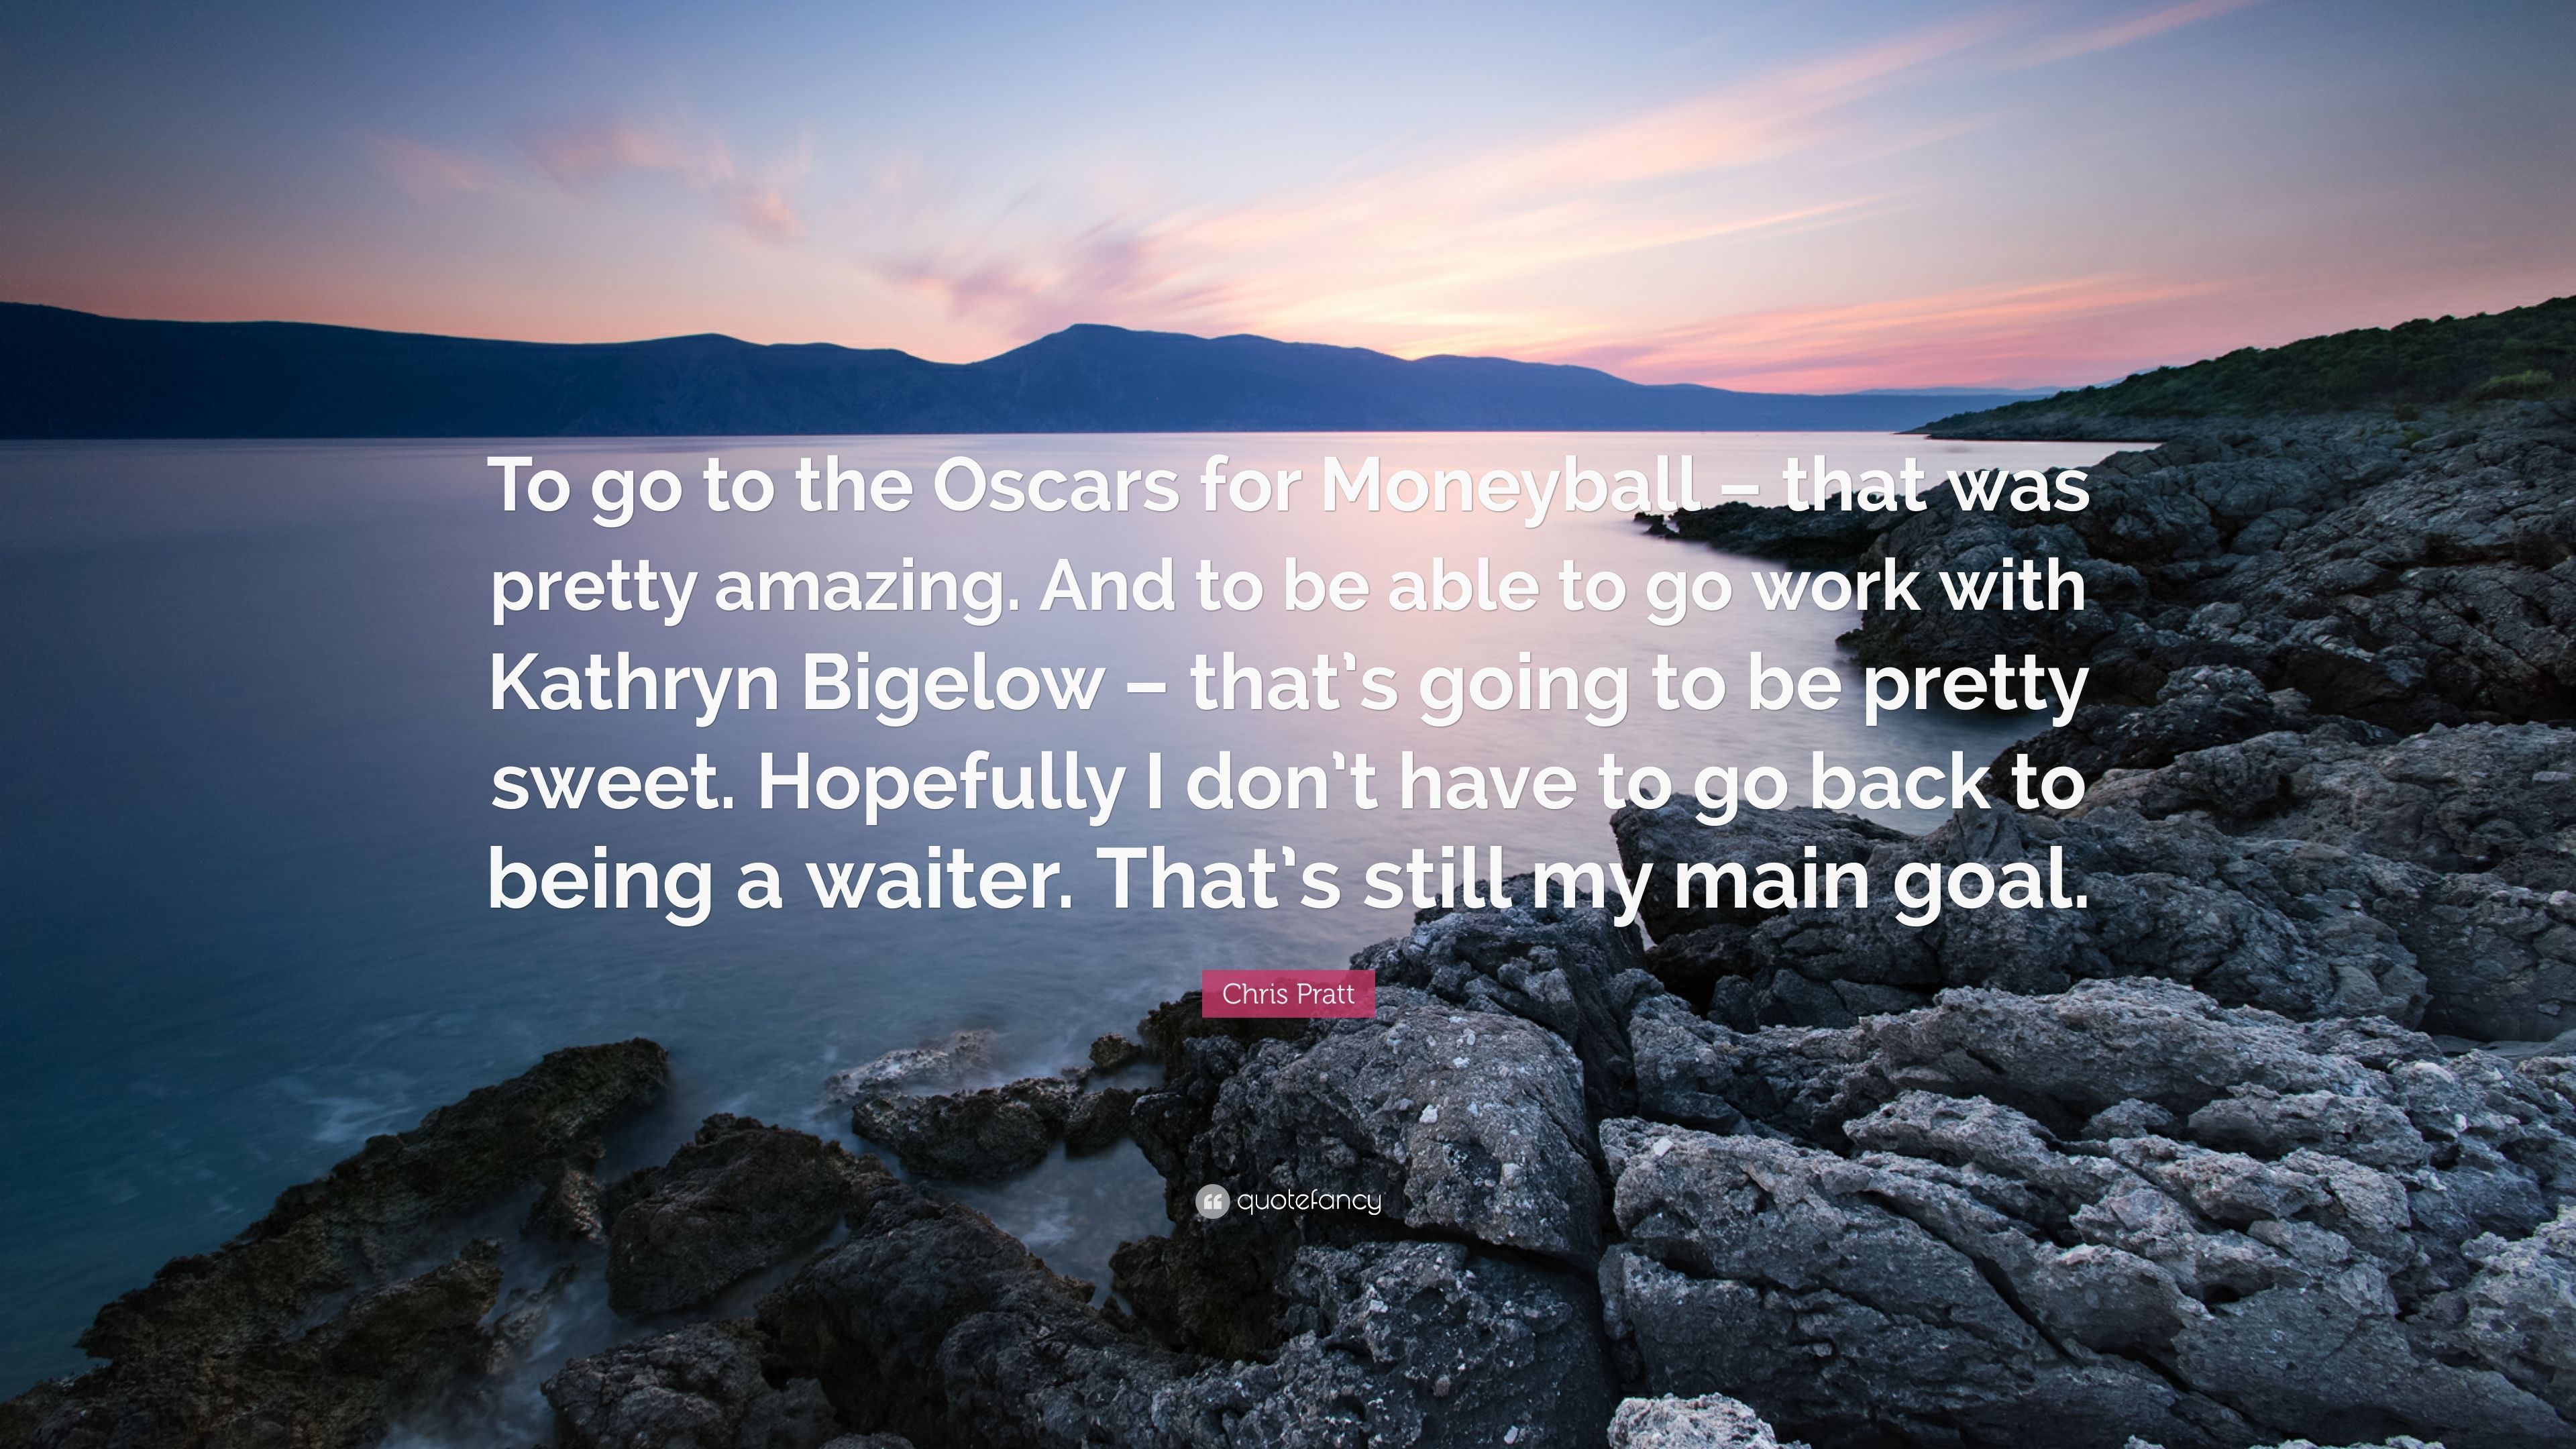 Chris Pratt Quote: “To go to the Oscars for Moneyball